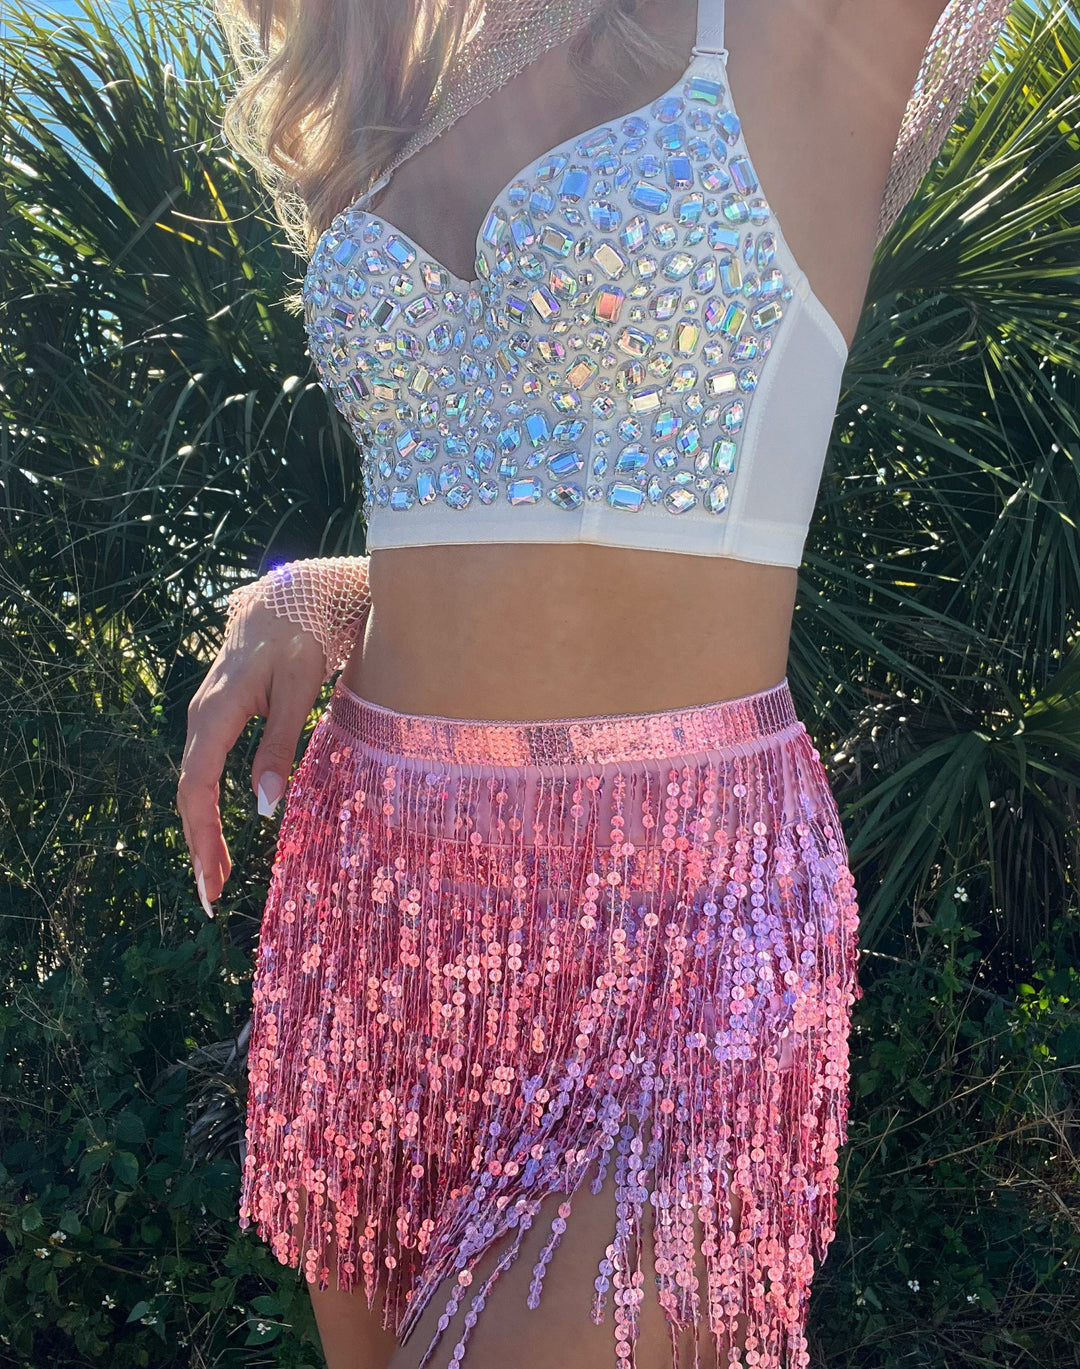 Festival clothing Pink Sequin Skirt Rave Outfit Festival Skirt Sarong Tie Wrap Mini Skirt rave outfits rave clothing women